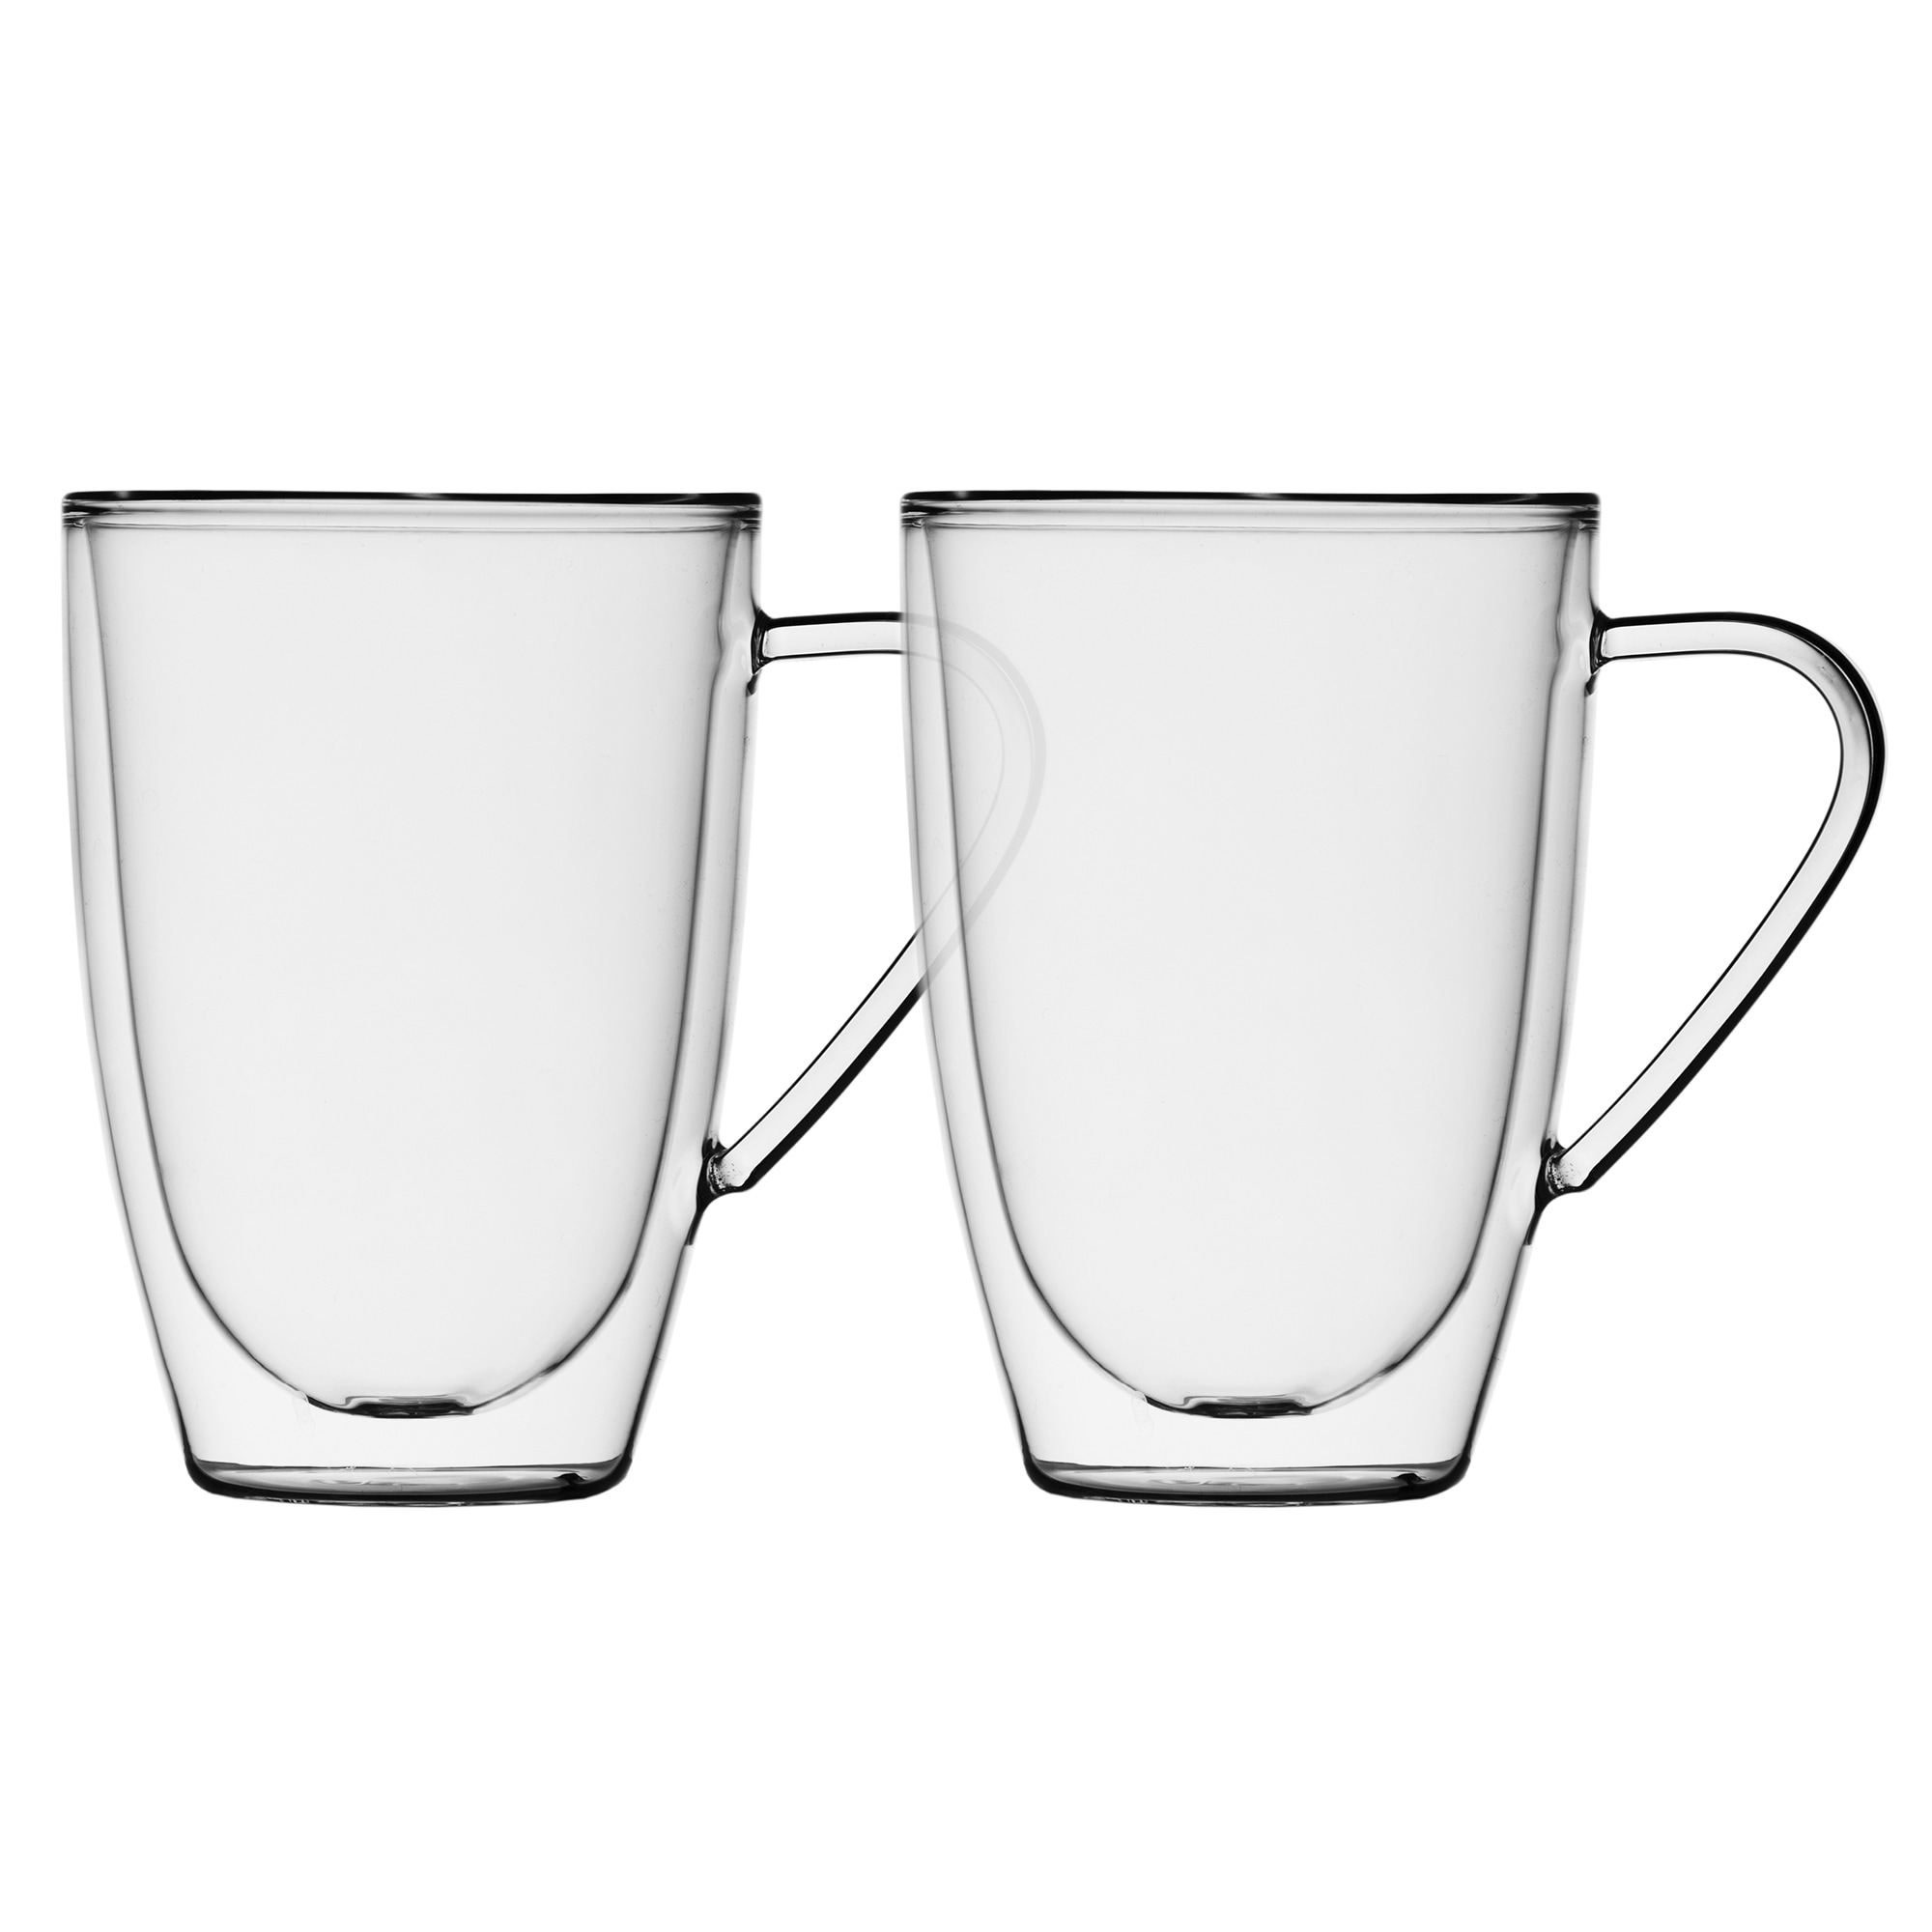 Insulated Double Wall Mug Cup Glass-Set of 4 Mugs/Cups Thermal,435ml - On  Sale - Bed Bath & Beyond - 26440355